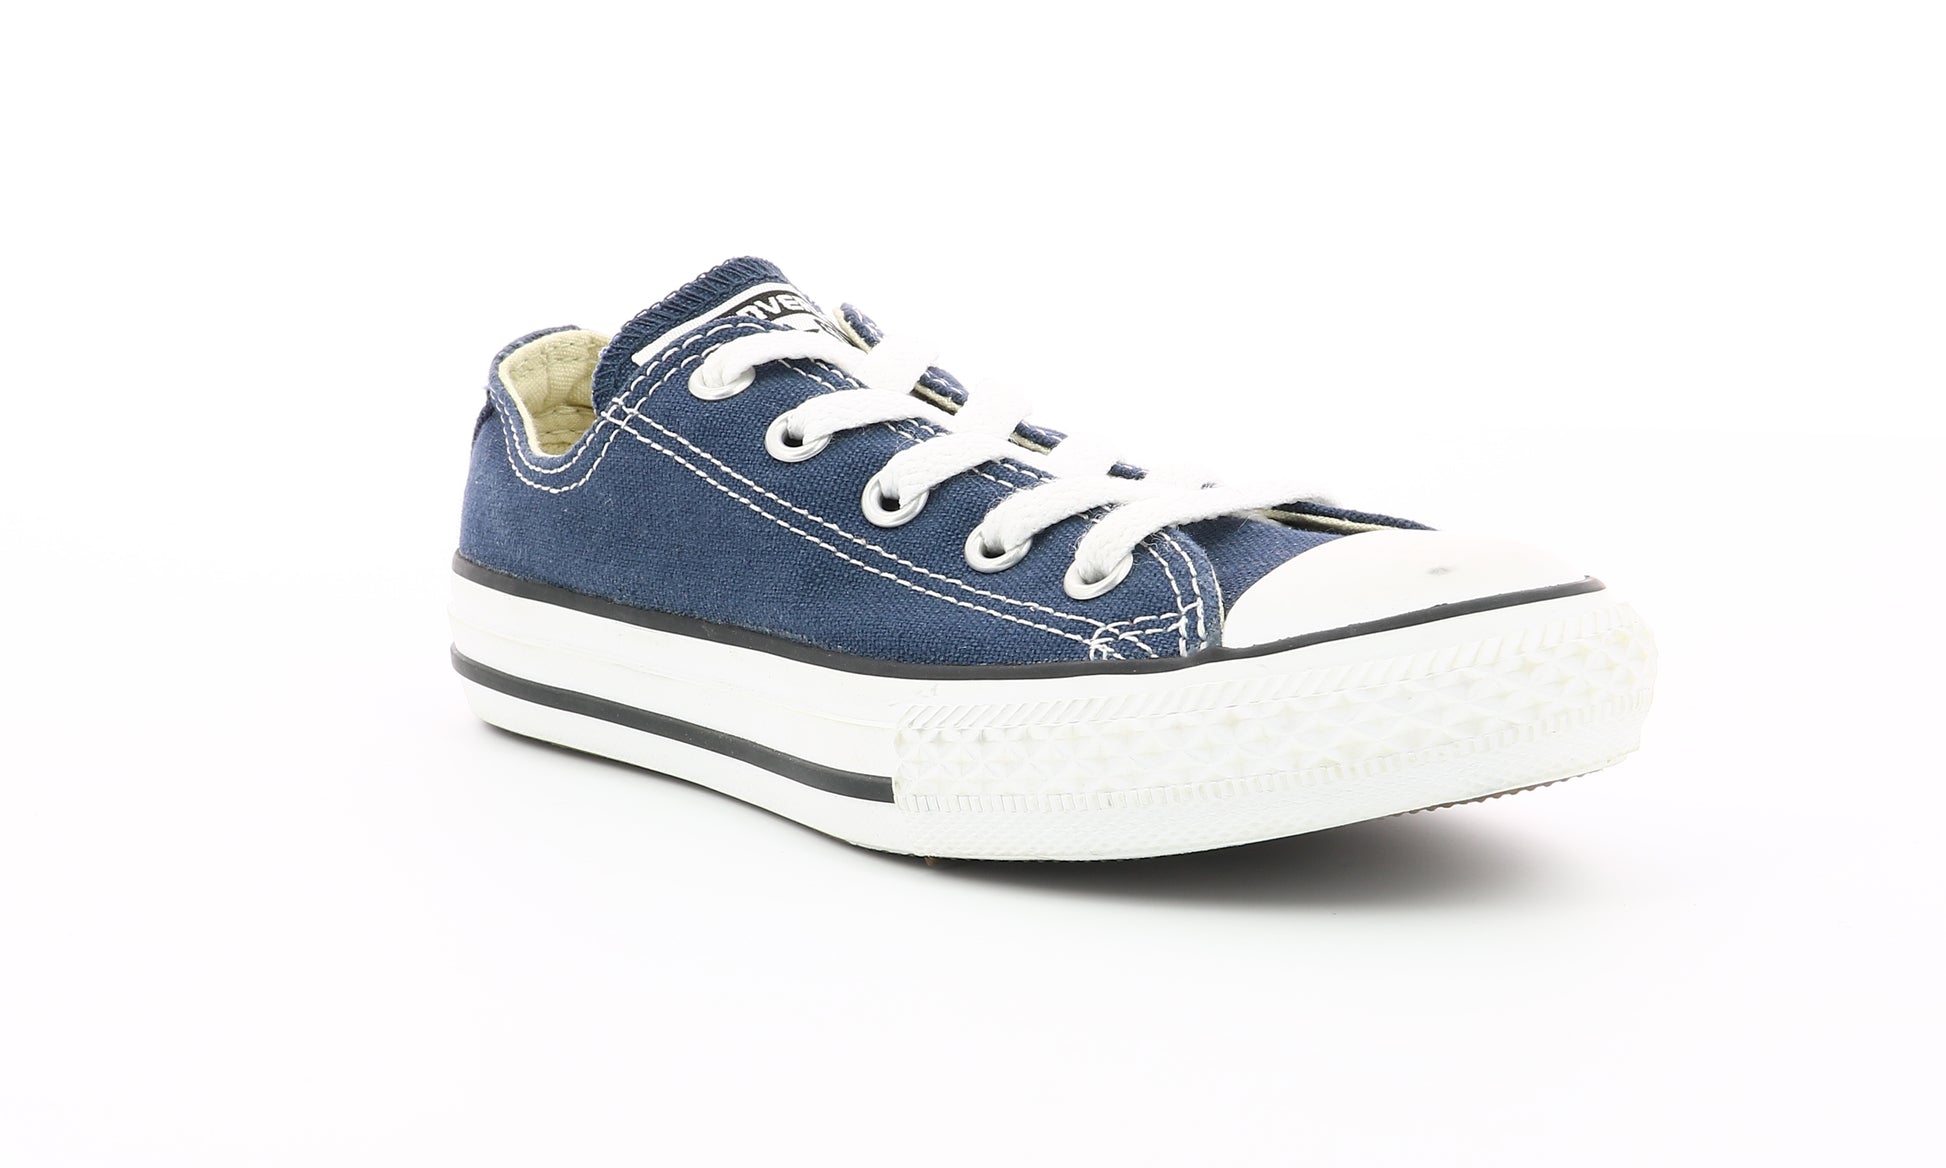 CONVERSE CTAS OX EV Chaussures Basses Baskets Sneakers marine